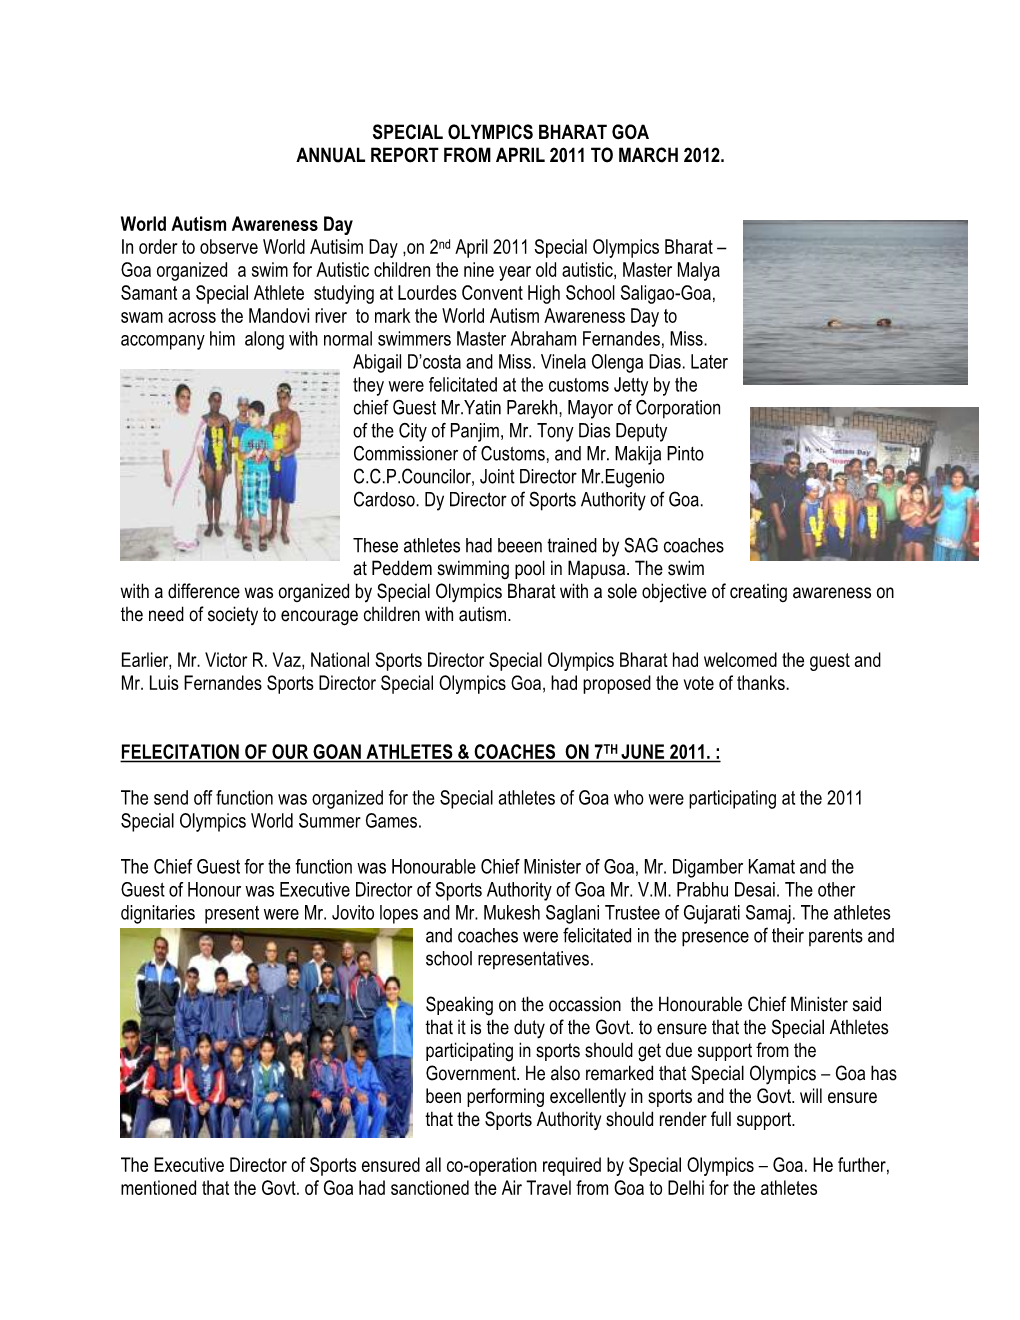 Special Olympics Bharat Goa Annual Report from April 2011 to March 2012